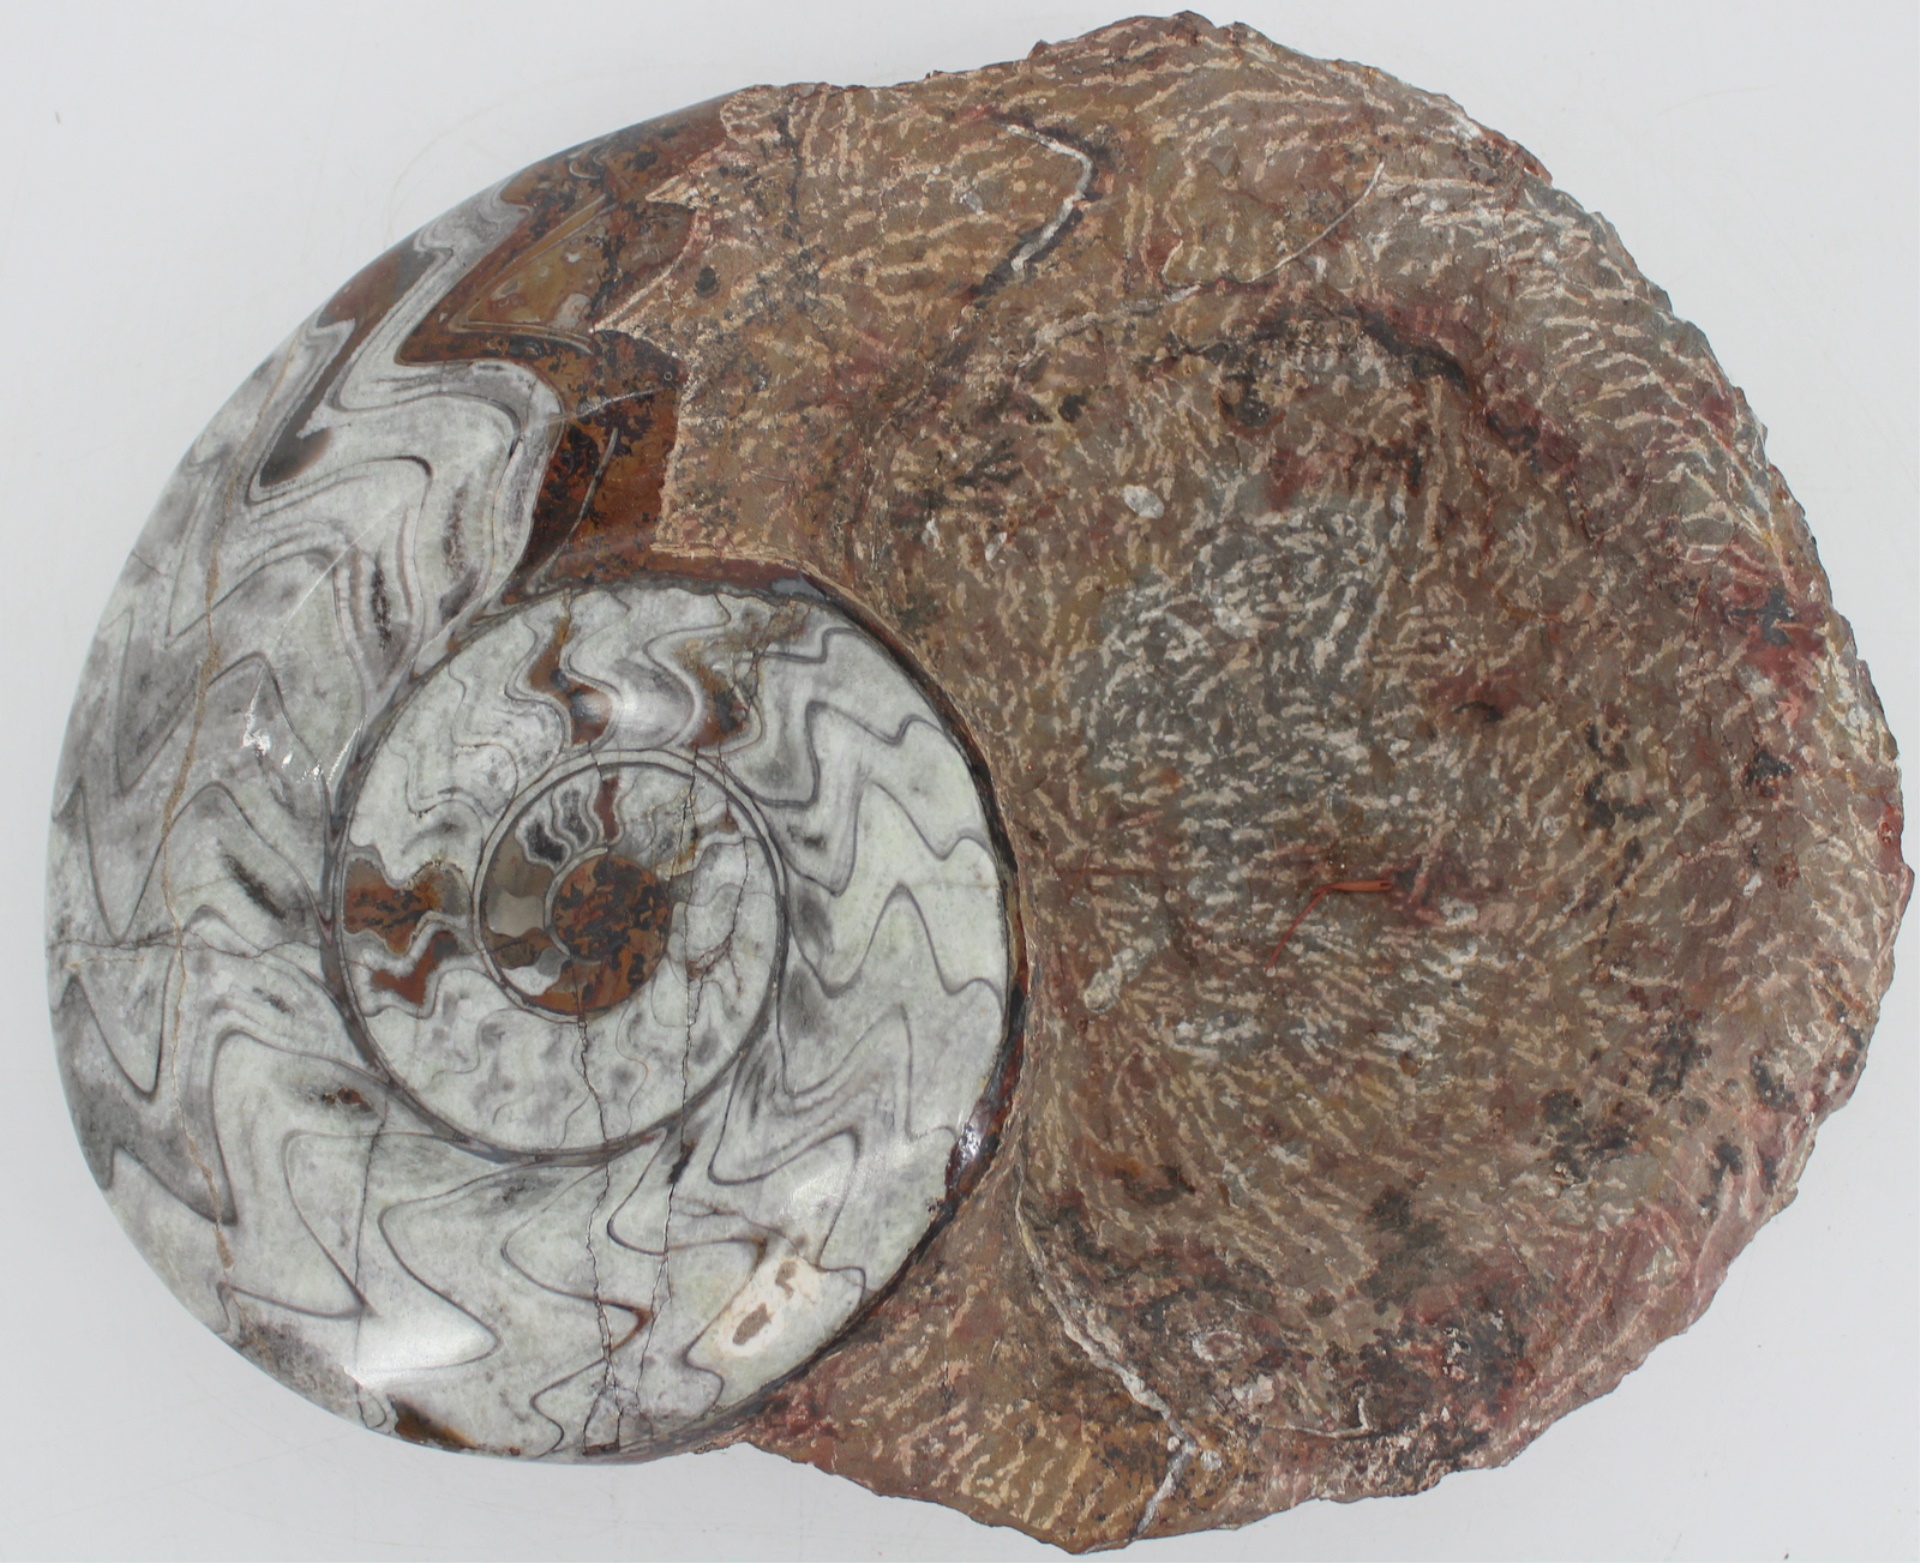 FOSSIL LARGE AMMONITE FOSSIL BOWL  3bcfe5